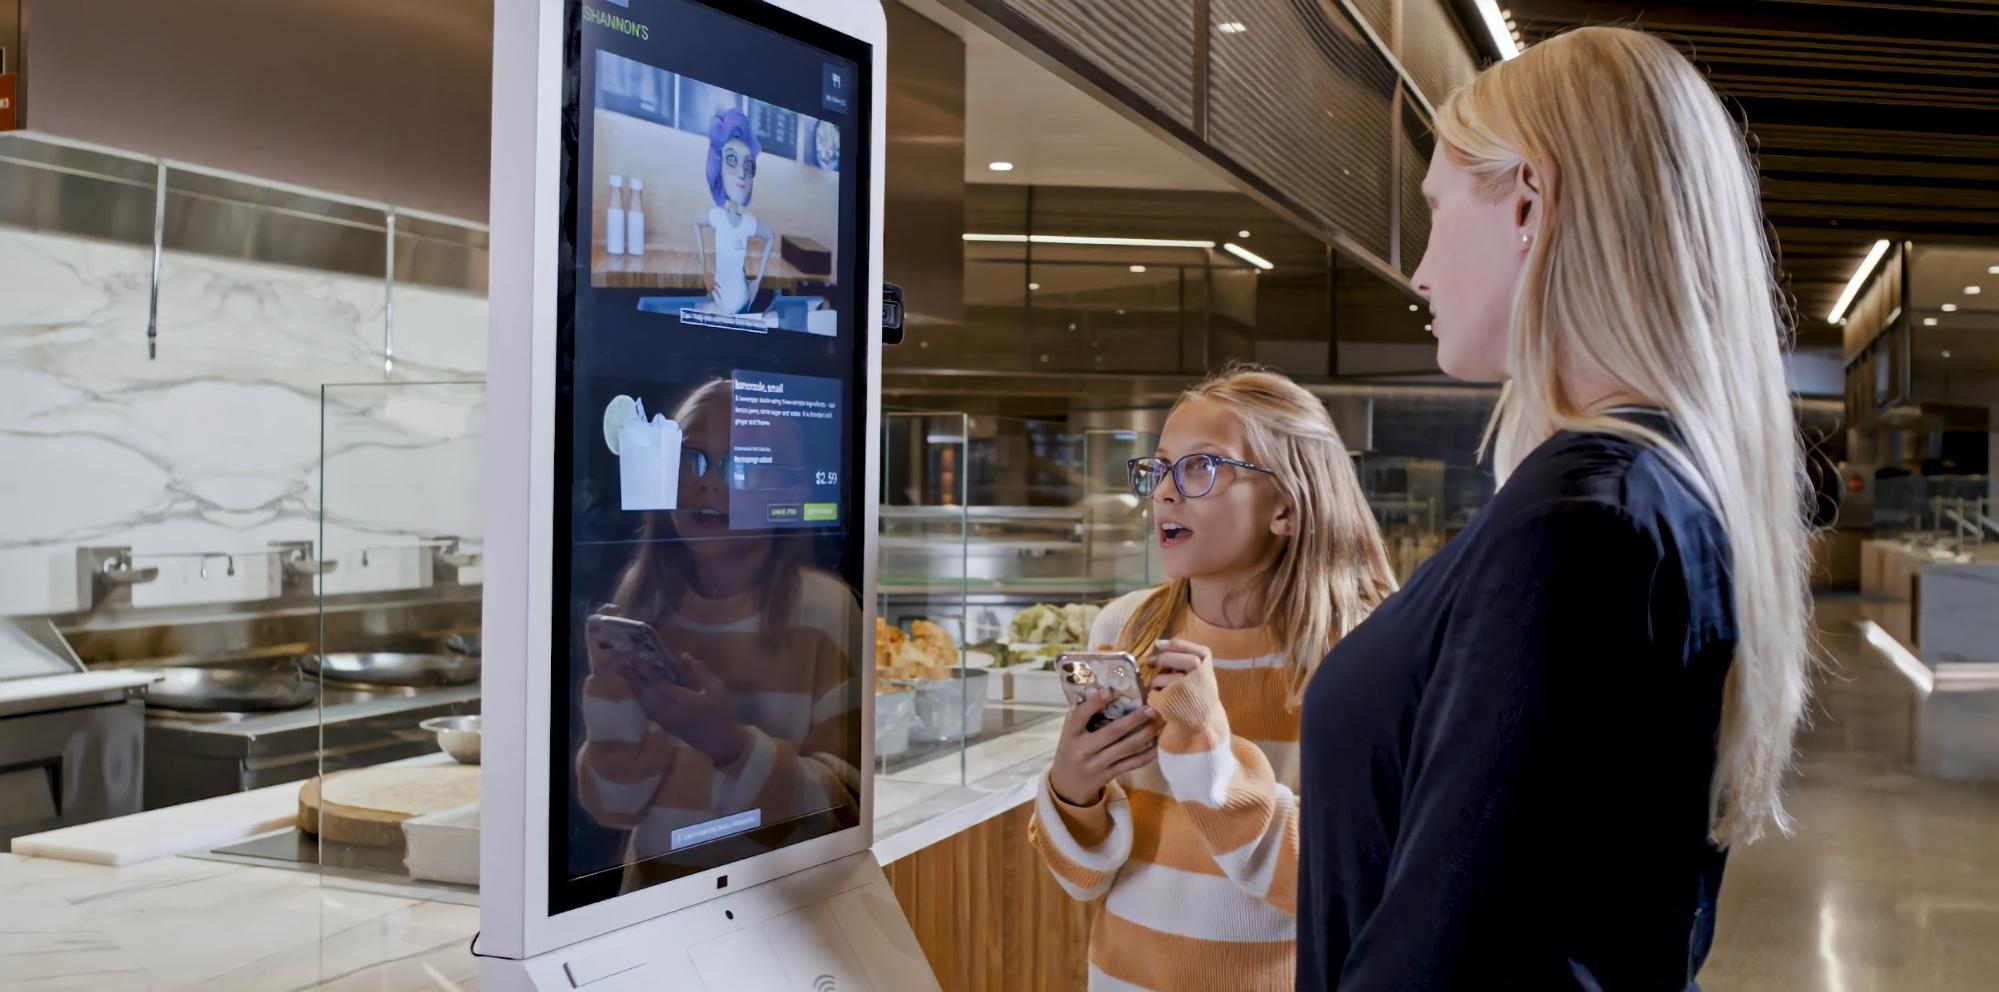 Photo shows a woman and child interact with an avatar in a restaurant ordering kiosk.